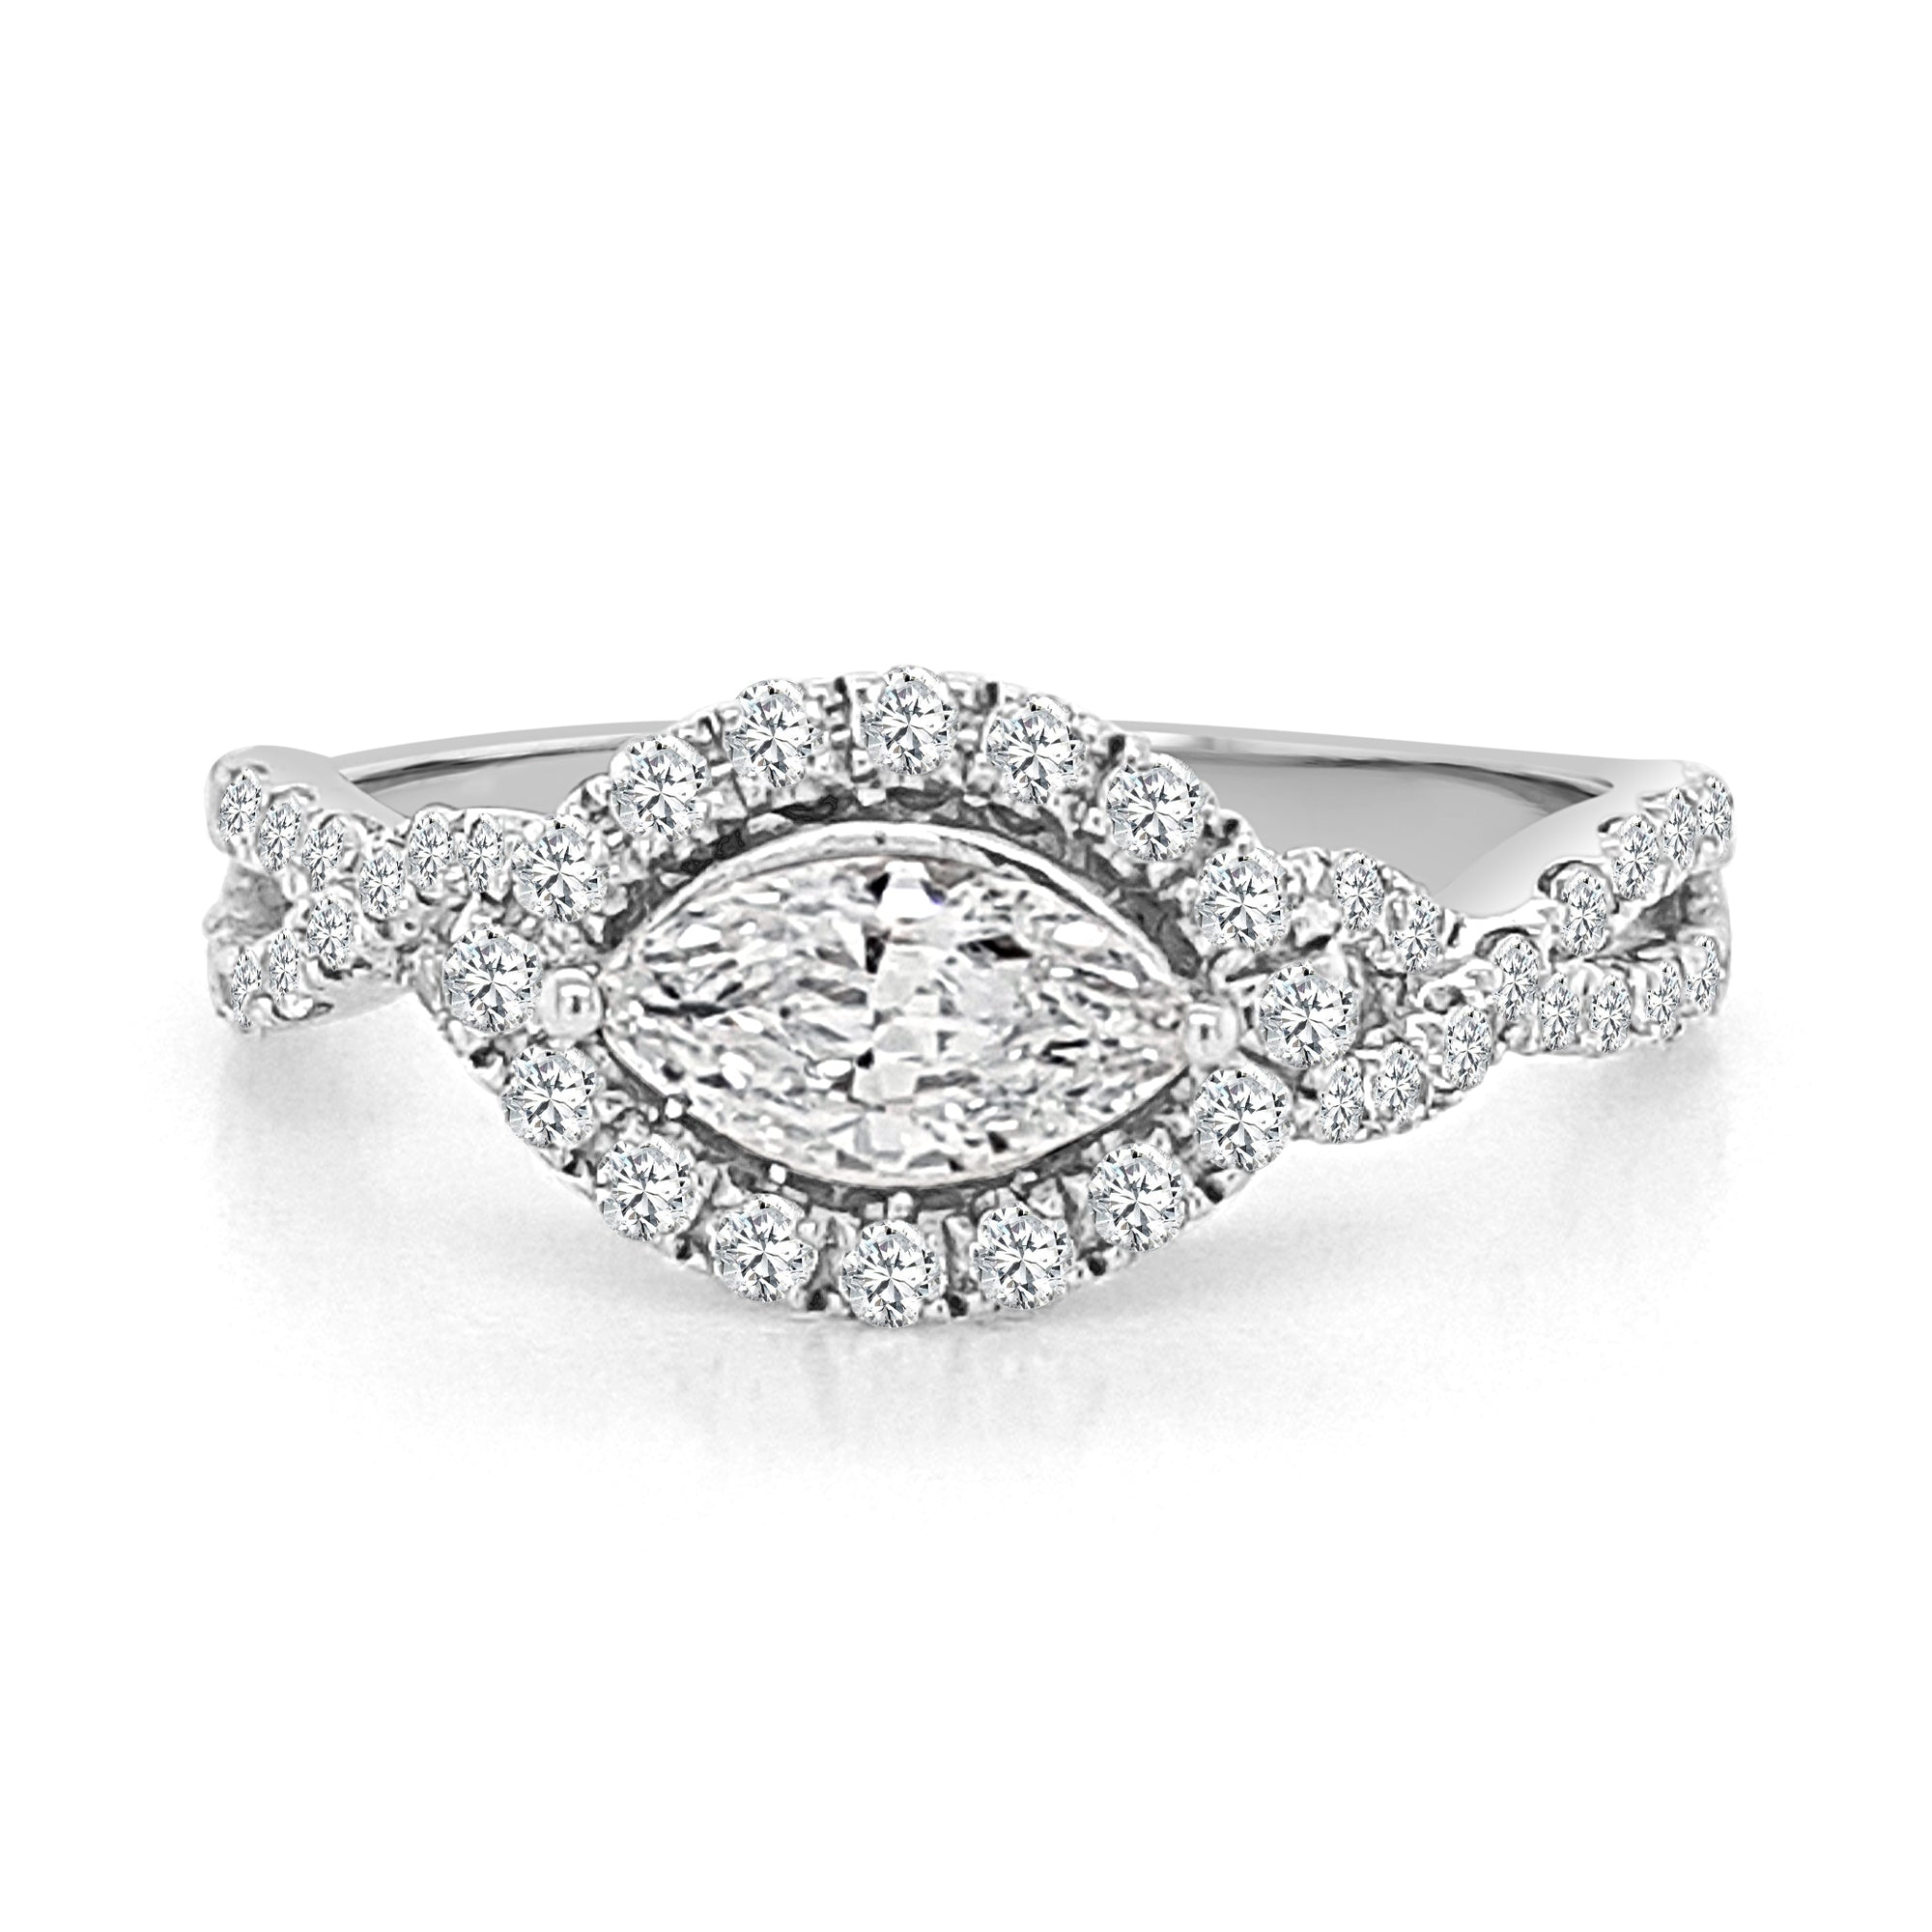 East-West Diamond Engagement Ring made in 14k White gold-Marquise